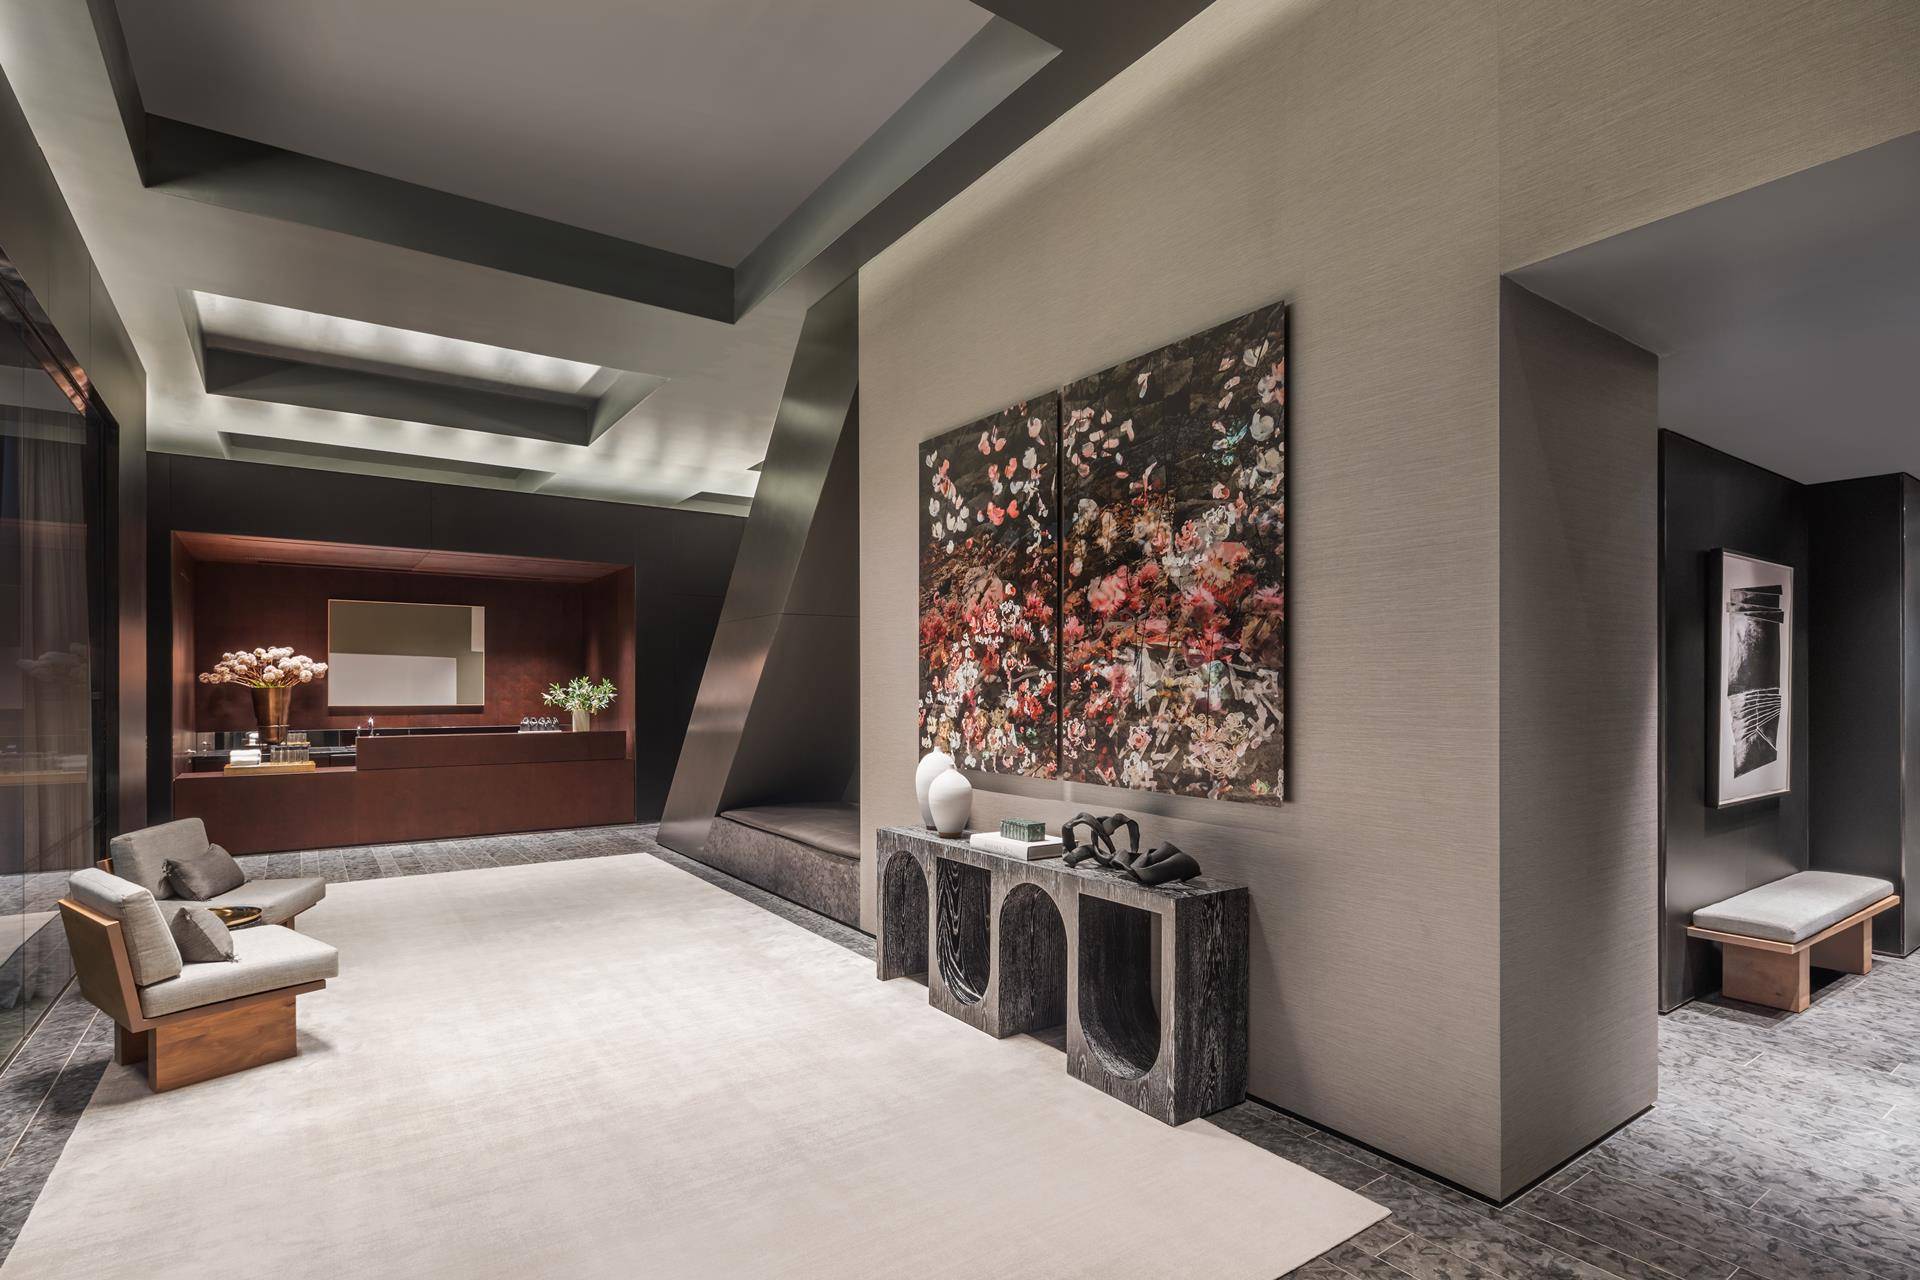 Balancing grand scale living with the intimate feeling of home, Residence 40A at 53 West 53 comprises 2, 838 square feet, offering two split bedrooms, two and a half bathrooms, ...